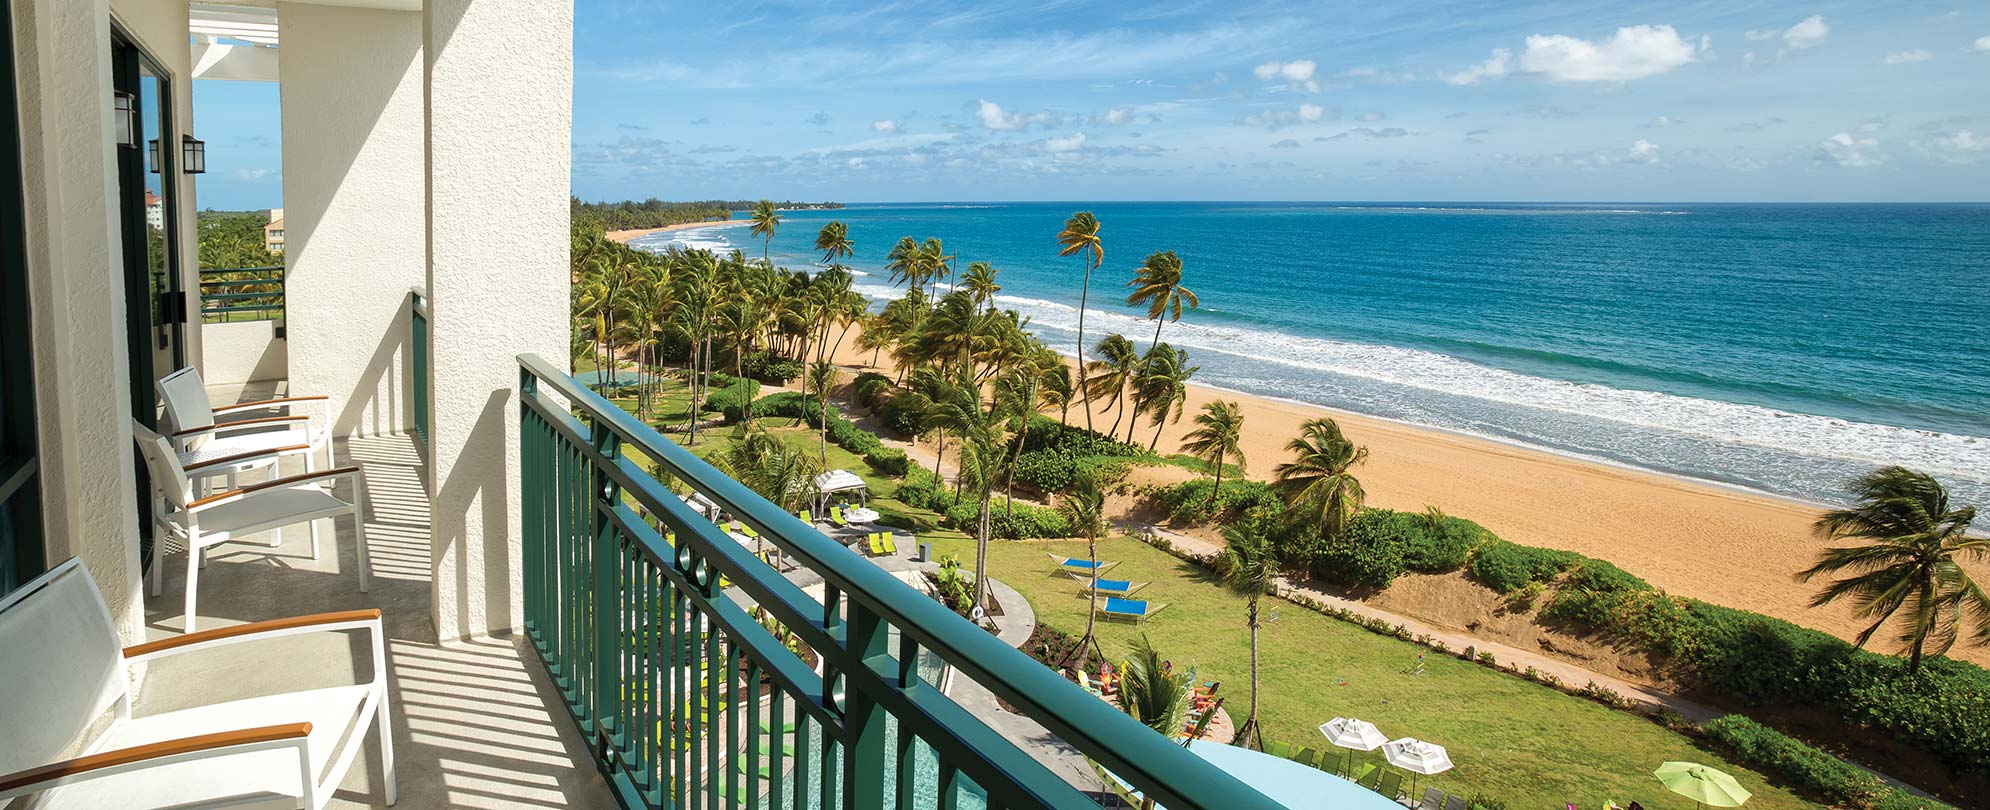 Ocean view from the balcony of a suite at Margaritaville Vacation Club - Rio Mar in Puerto Rico.